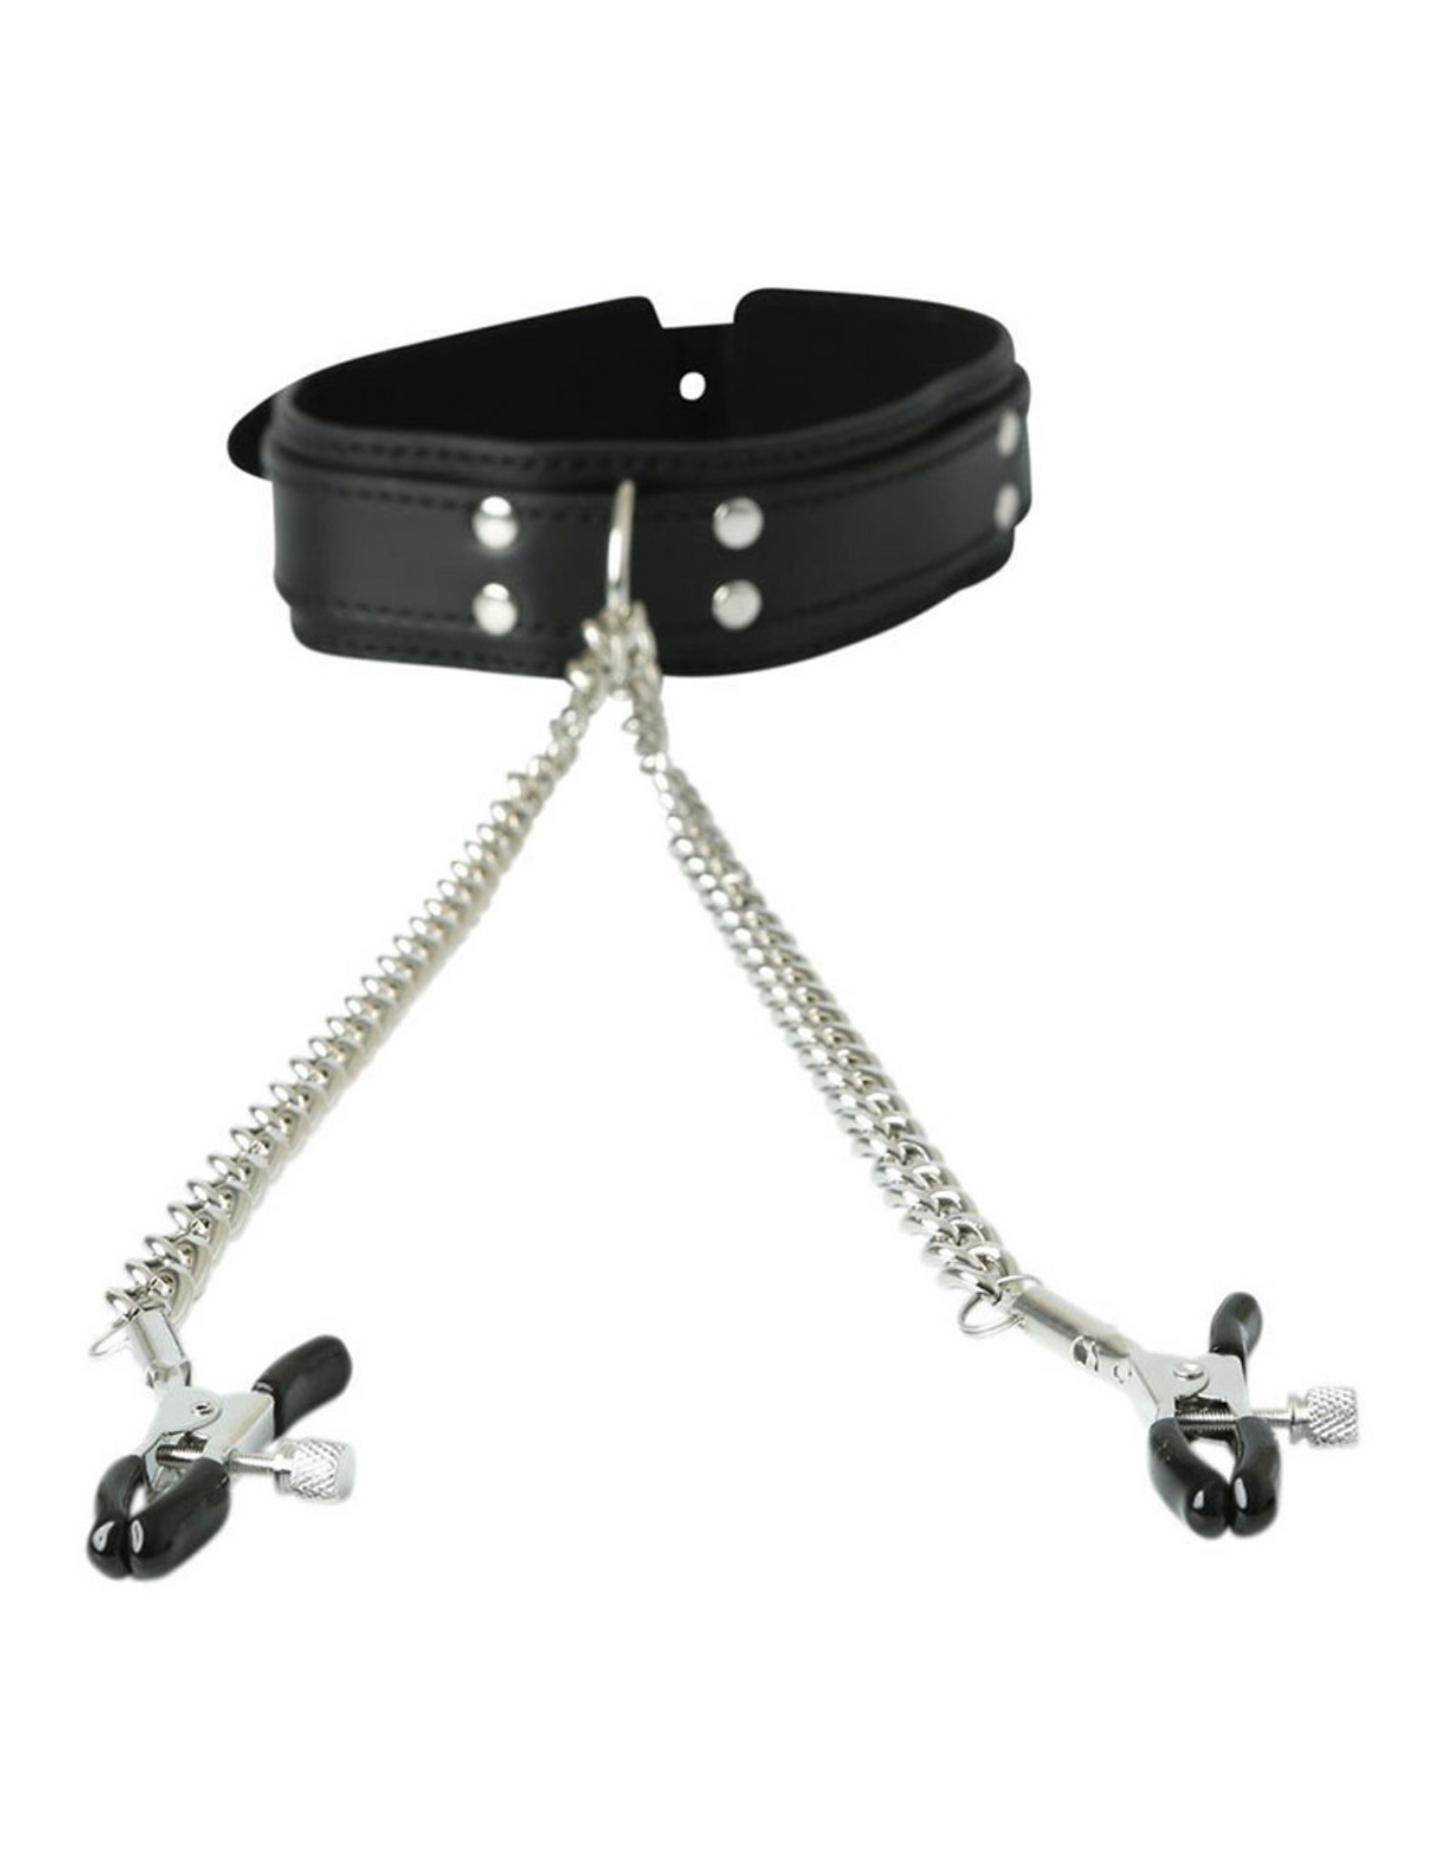 Over-head photo of the collar and chained nipple clamps show their size.